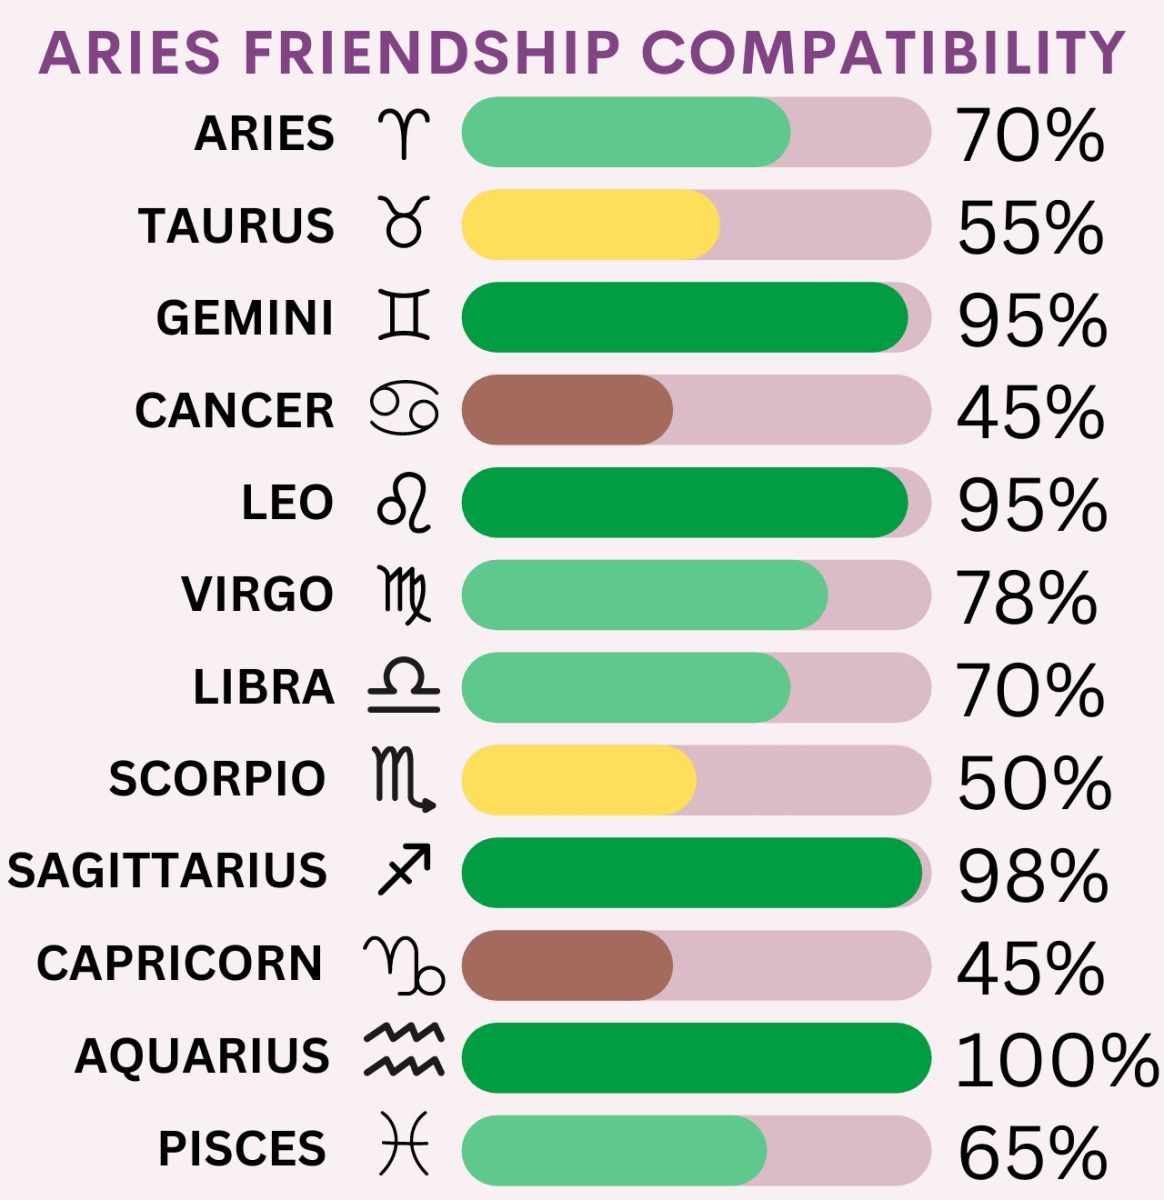 Aries Friendship Compatibility with All Zodiac Signs (Percentages and